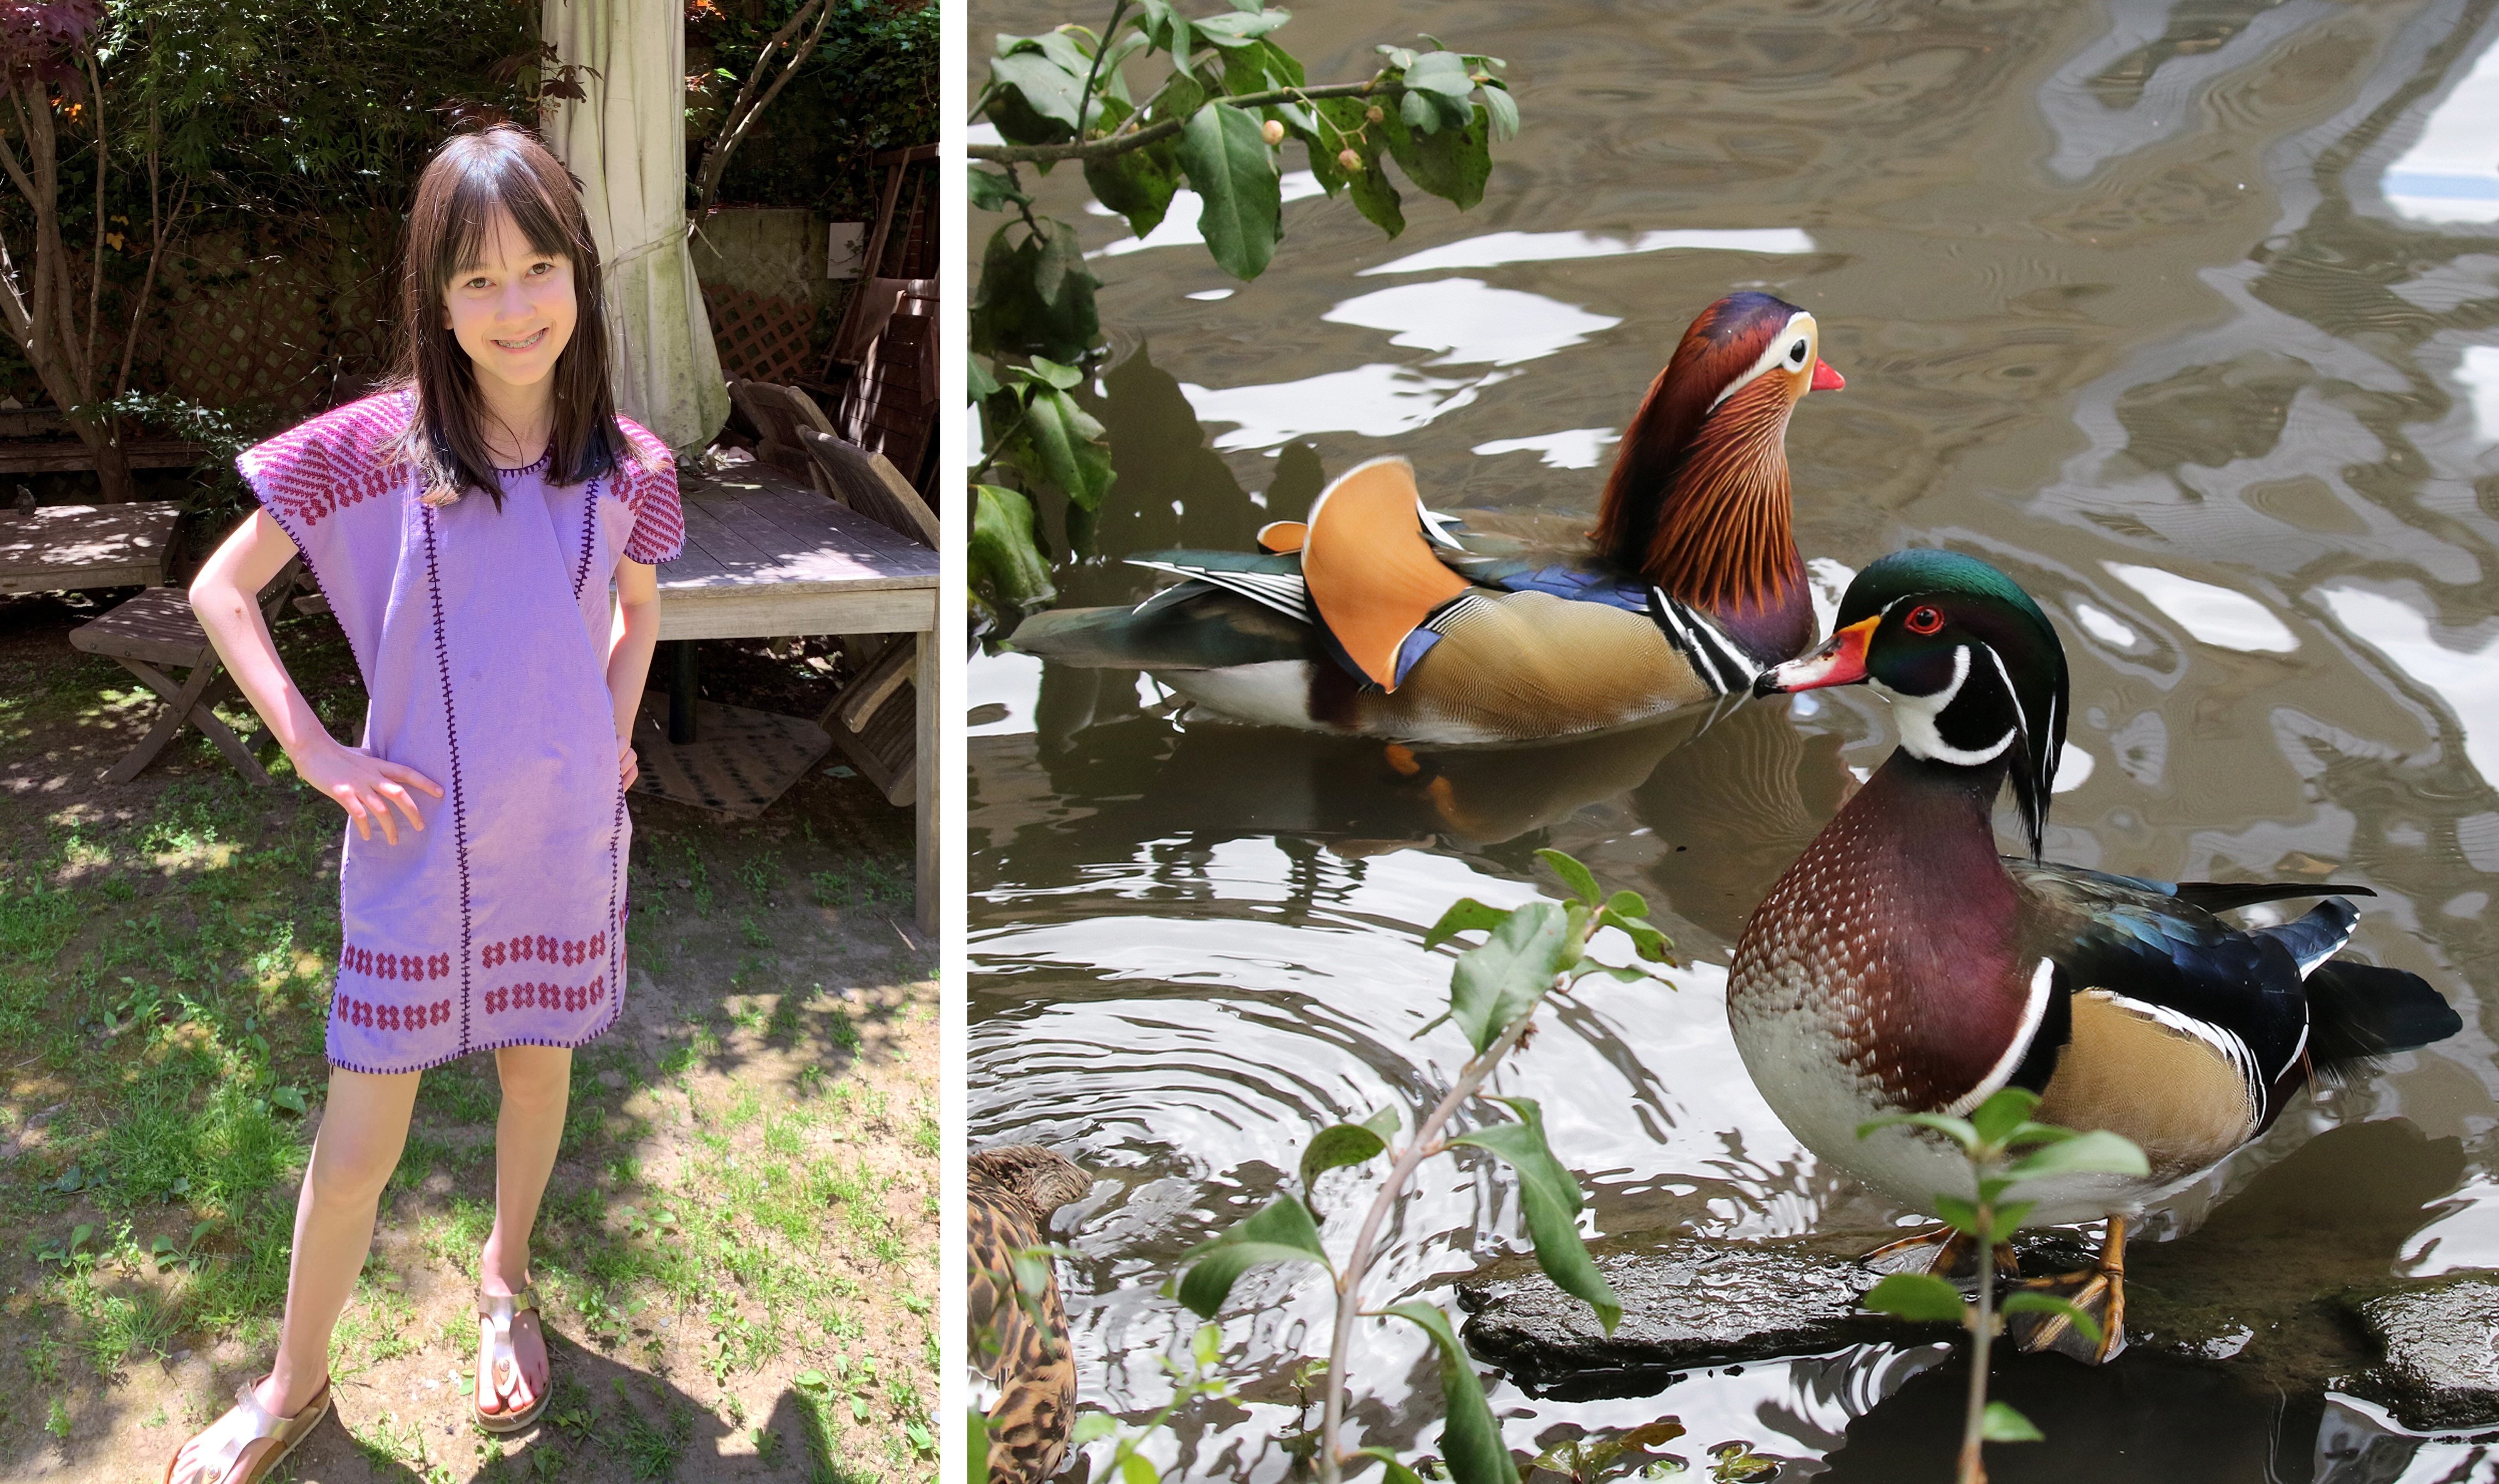 At 8 years old, Thu Lan Perales-Nguyen (now 11) correctly disinguished the exotic Mandarin Duck drake (left) from the native Wood Duck drake (right). Photos: Hong Nguyen, Melody Andres